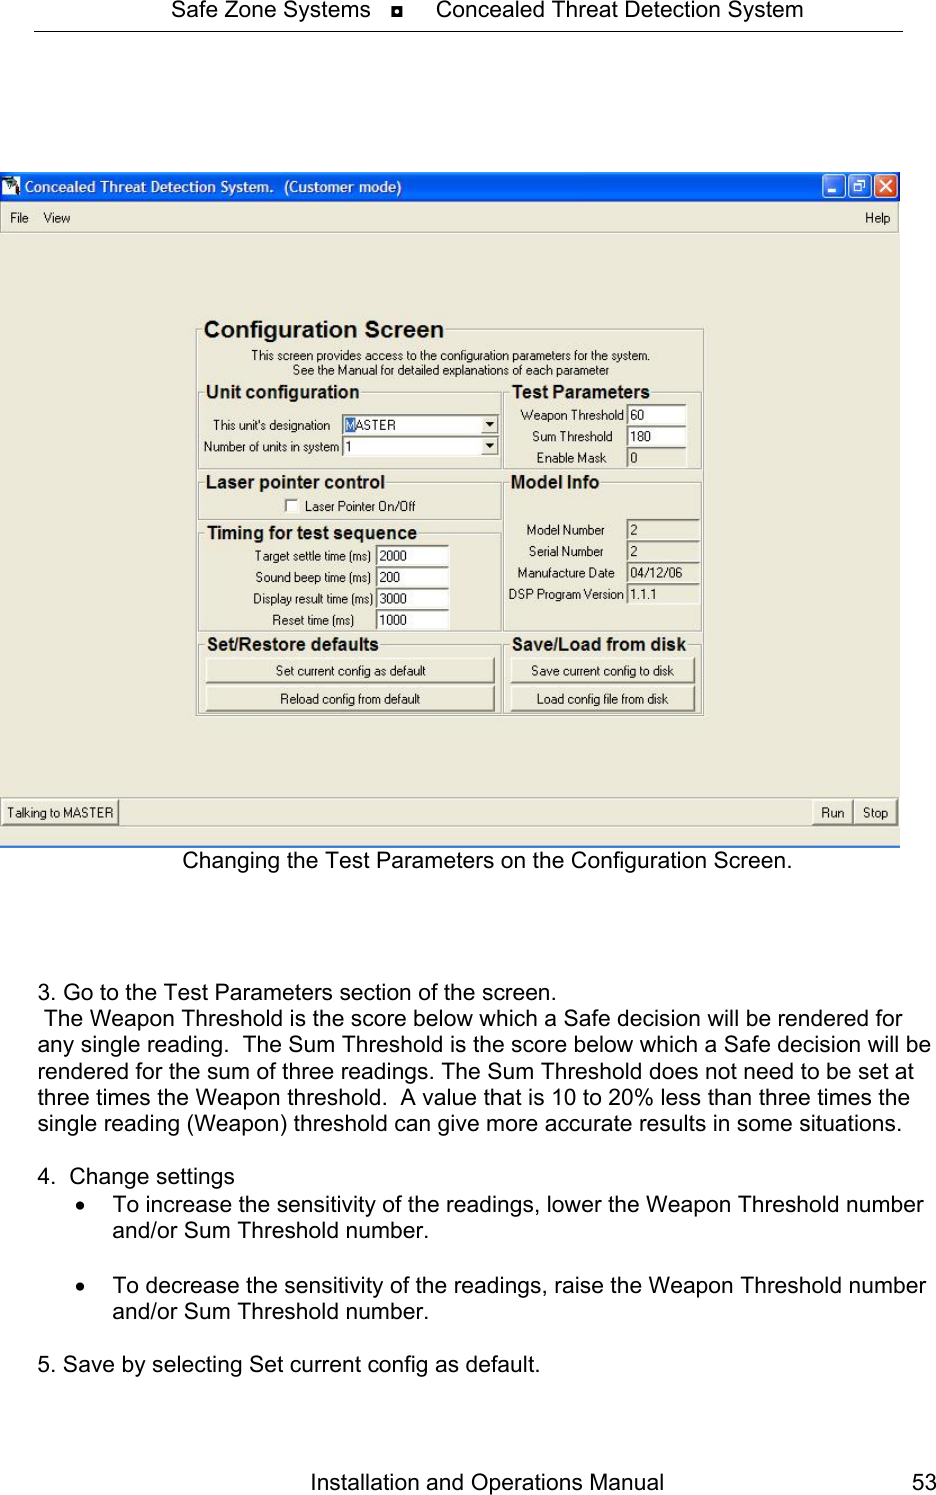 Safe Zone Systems   ◘     Concealed Threat Detection System     Changing the Test Parameters on the Configuration Screen.     3. Go to the Test Parameters section of the screen.  The Weapon Threshold is the score below which a Safe decision will be rendered for any single reading.  The Sum Threshold is the score below which a Safe decision will be rendered for the sum of three readings. The Sum Threshold does not need to be set at three times the Weapon threshold.  A value that is 10 to 20% less than three times the single reading (Weapon) threshold can give more accurate results in some situations.  4.  Change settings •  To increase the sensitivity of the readings, lower the Weapon Threshold number and/or Sum Threshold number.    •  To decrease the sensitivity of the readings, raise the Weapon Threshold number and/or Sum Threshold number.  5. Save by selecting Set current config as default. Installation and Operations Manual  53